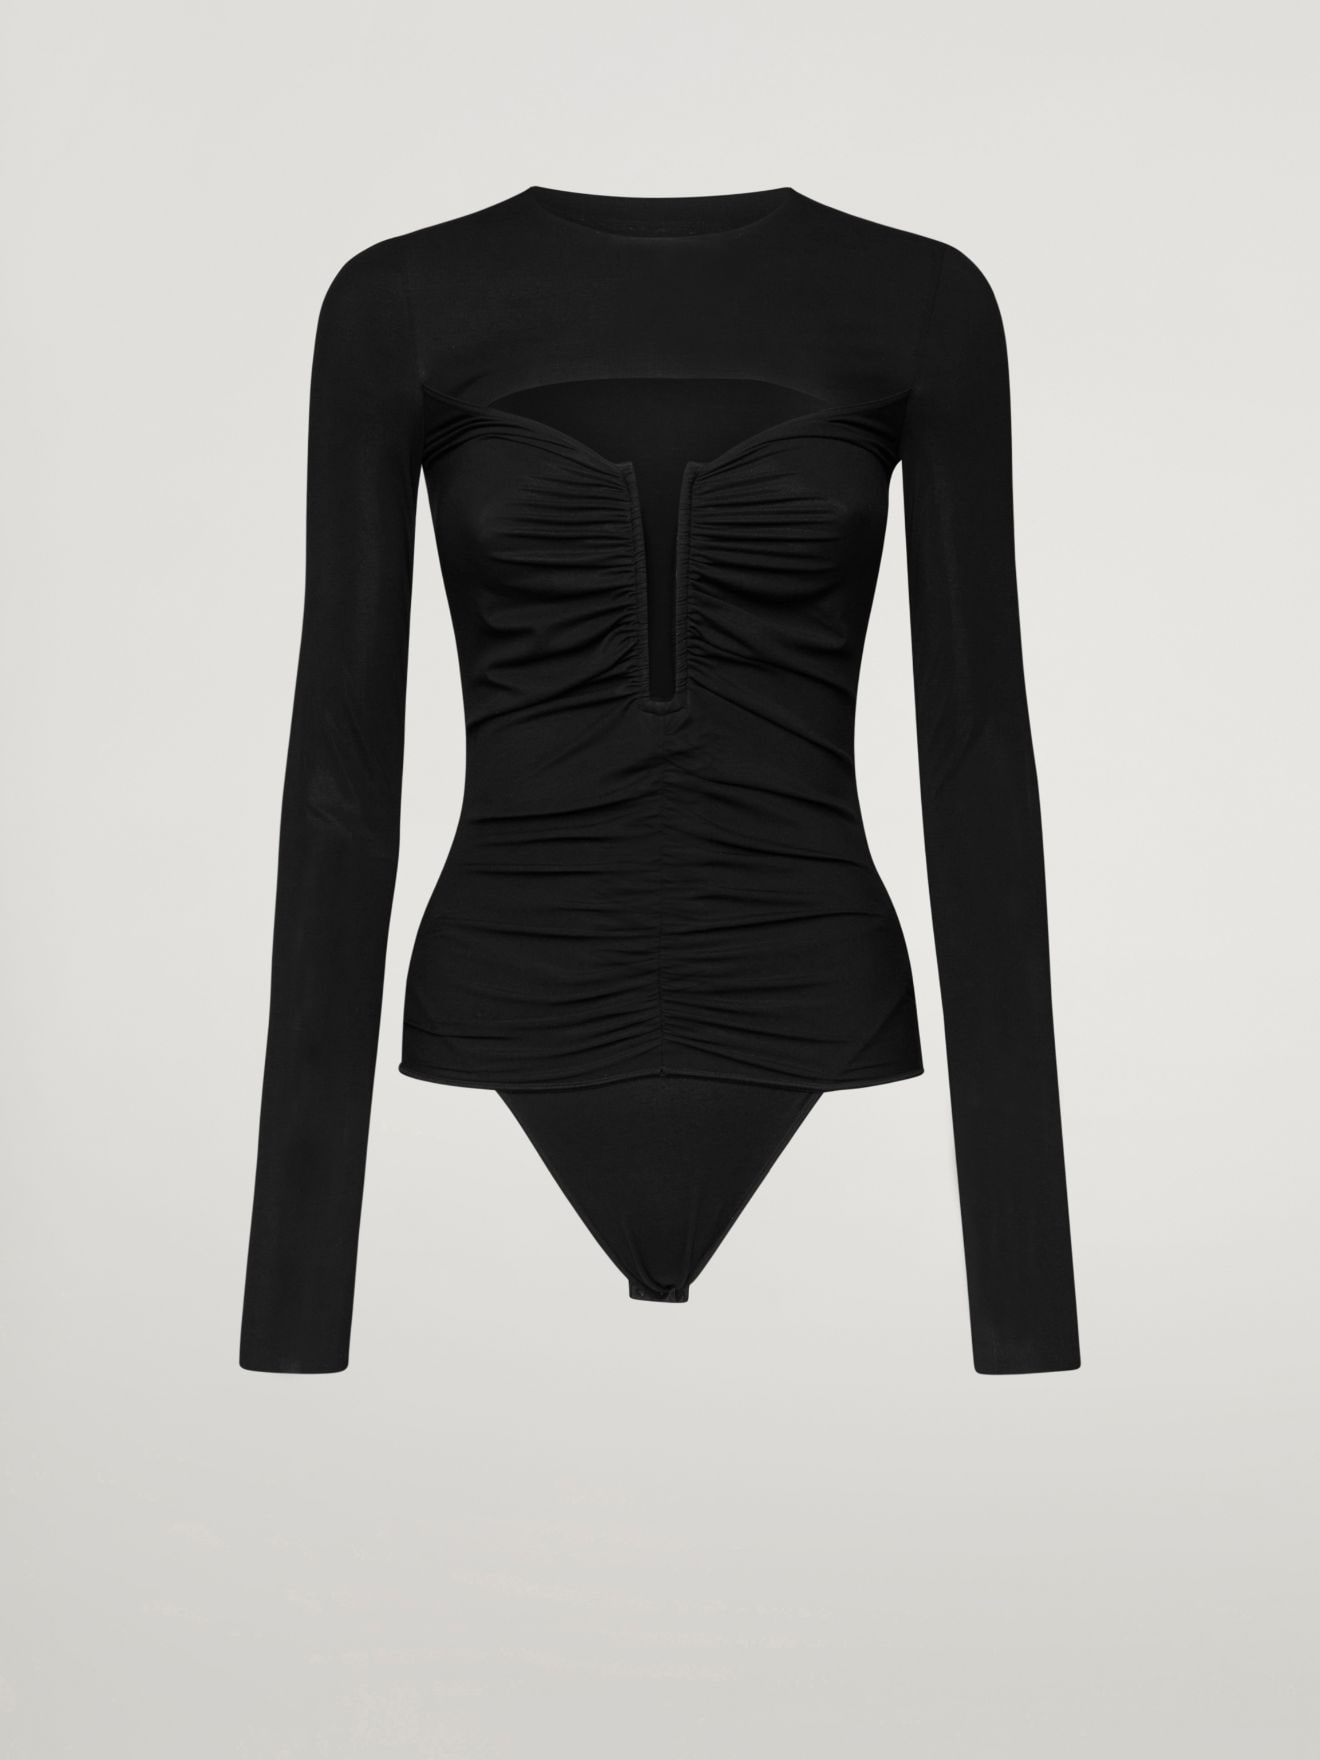 N21 x Wolford: Plunging cut-out bodsysuit in 7005, N°21